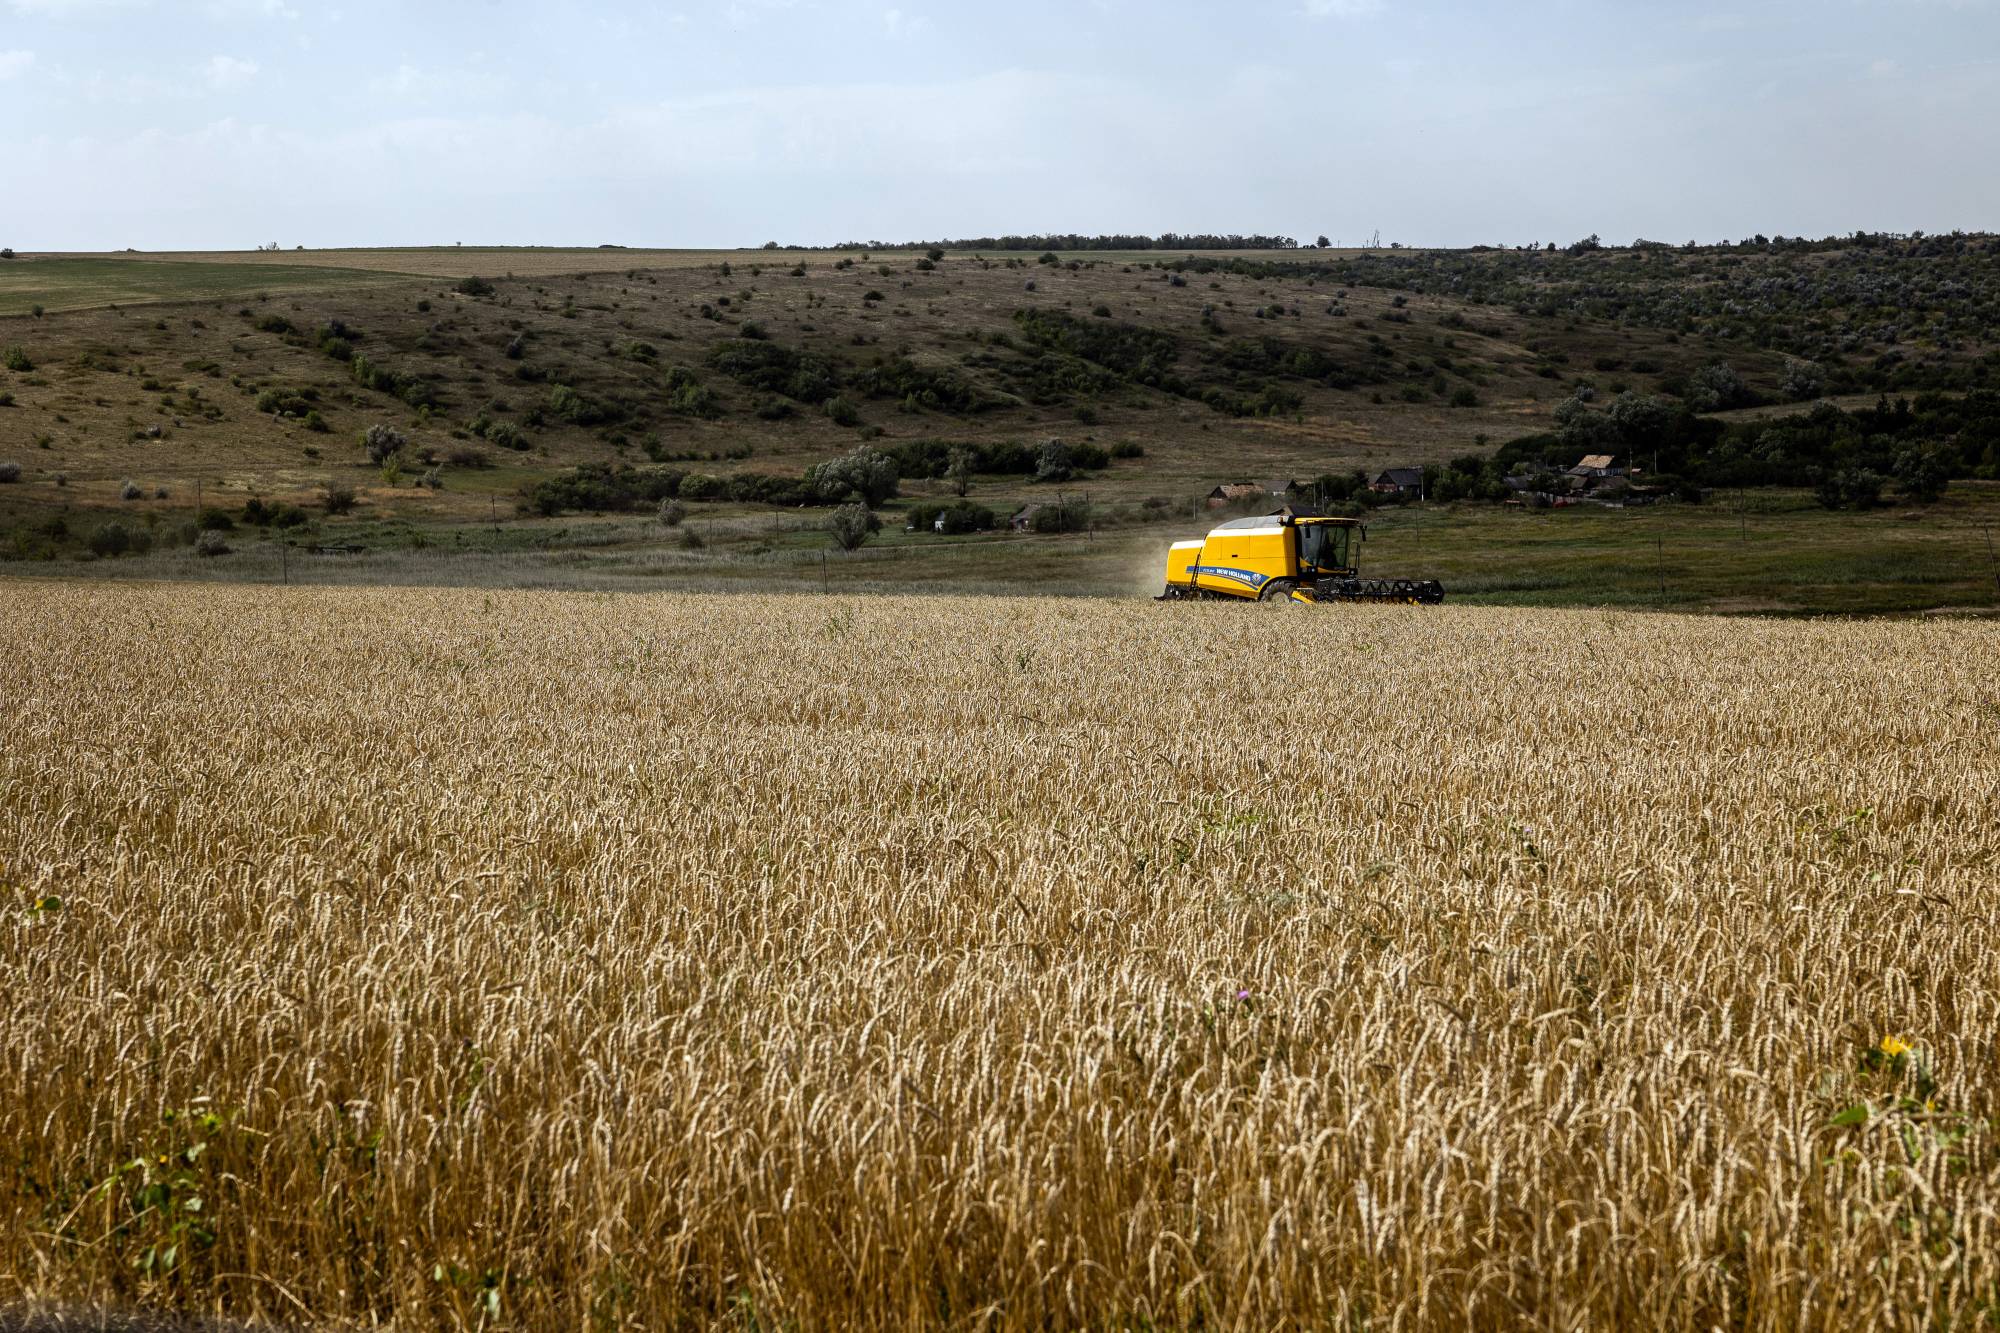 Wheat is harvested on a farm near Chasiv Yar, in eastern Ukraine. From March to November, Ukraine exported an average of 3.5 million metric tons of grains and oilseeds, a drop from the five to seven million metric tons per month before the war.  | JIM HUYLEBROEK / THE NEW YORK TIMES